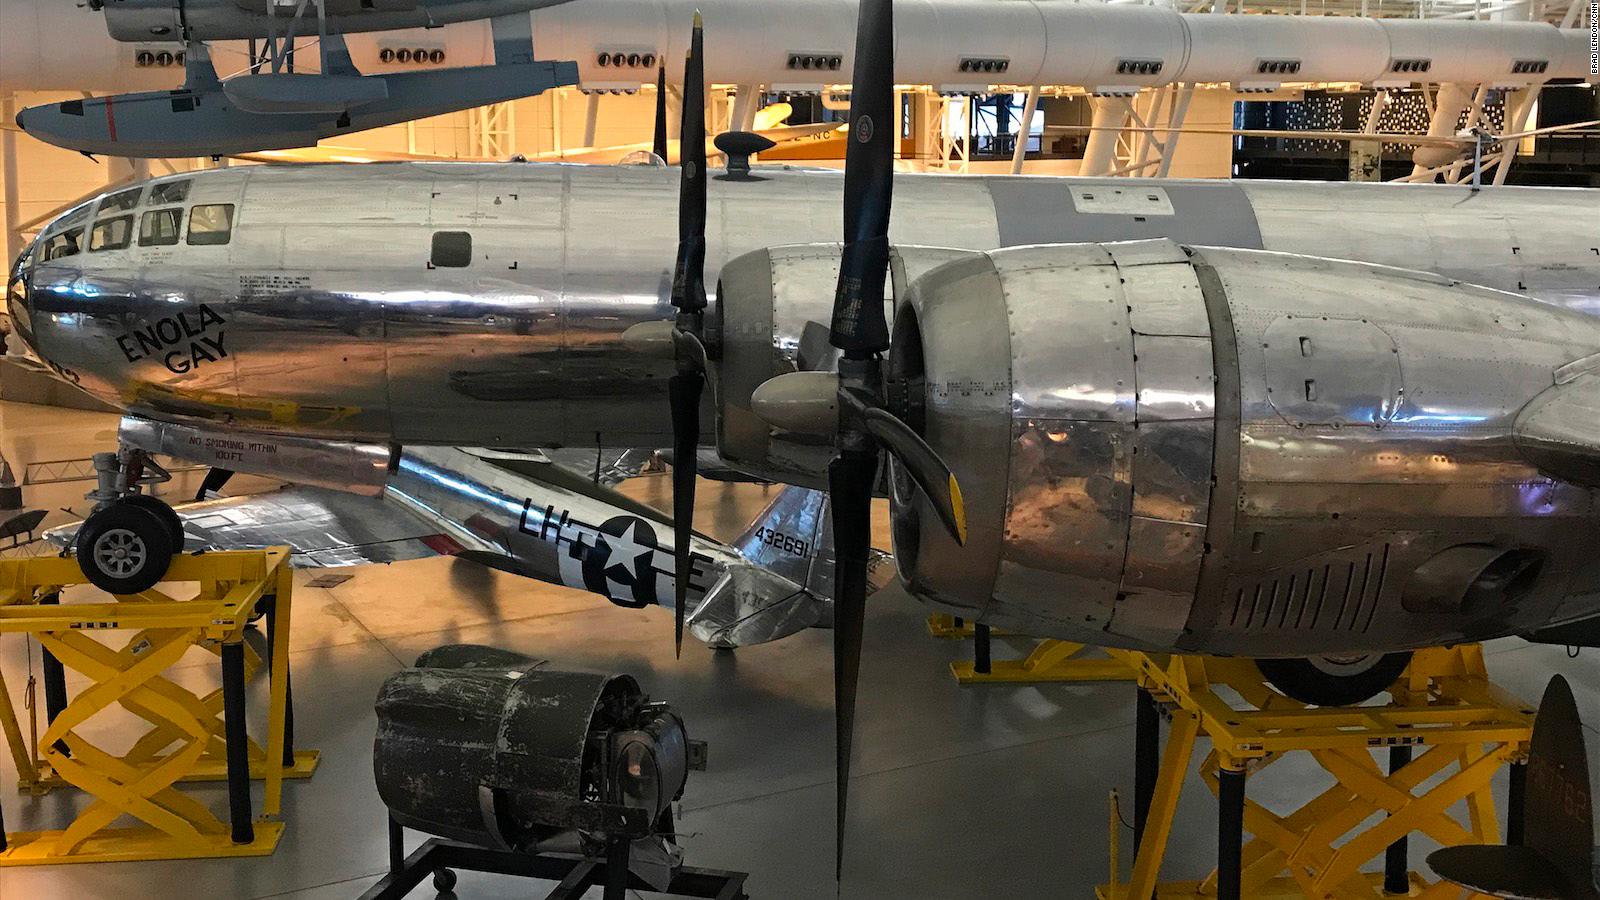 where is the enola gay on display